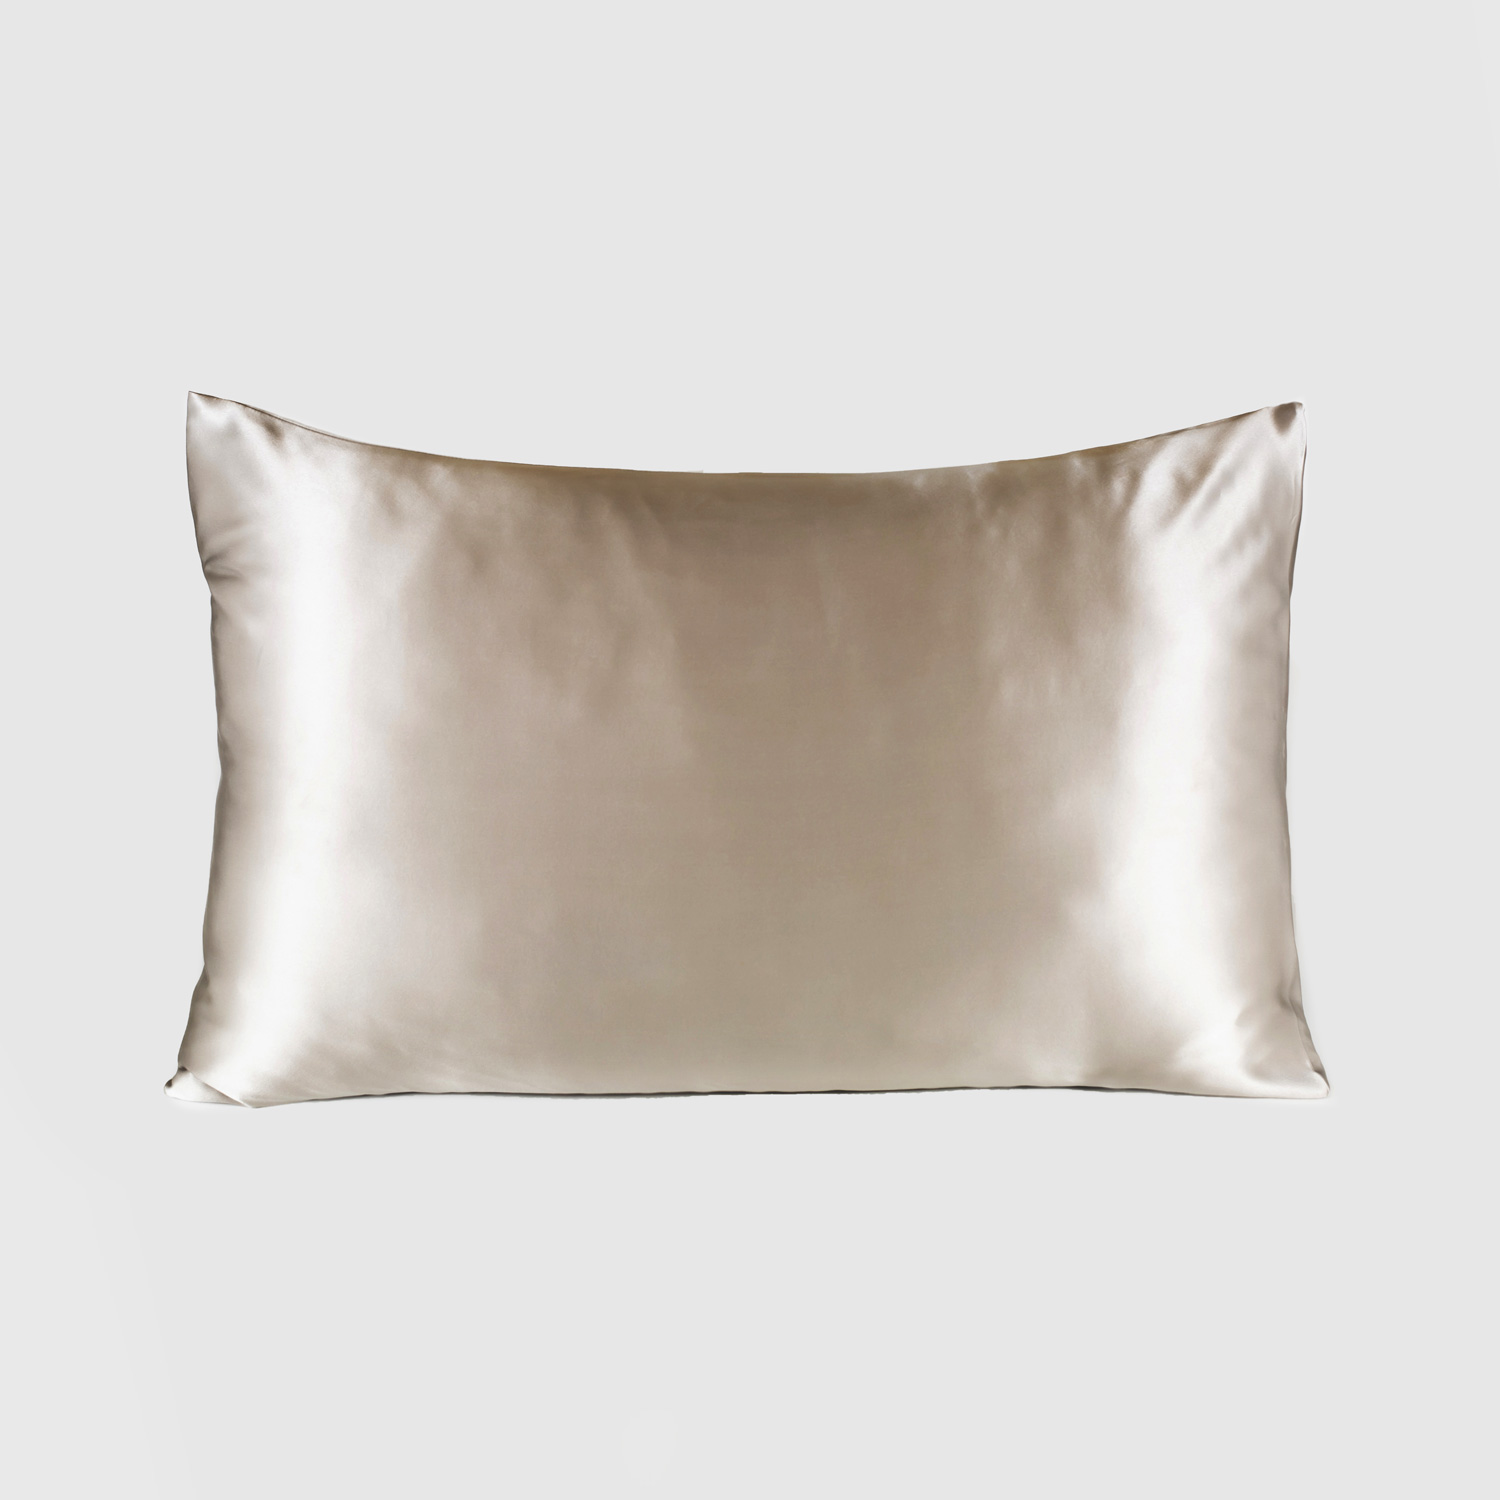 Champagne pillow case